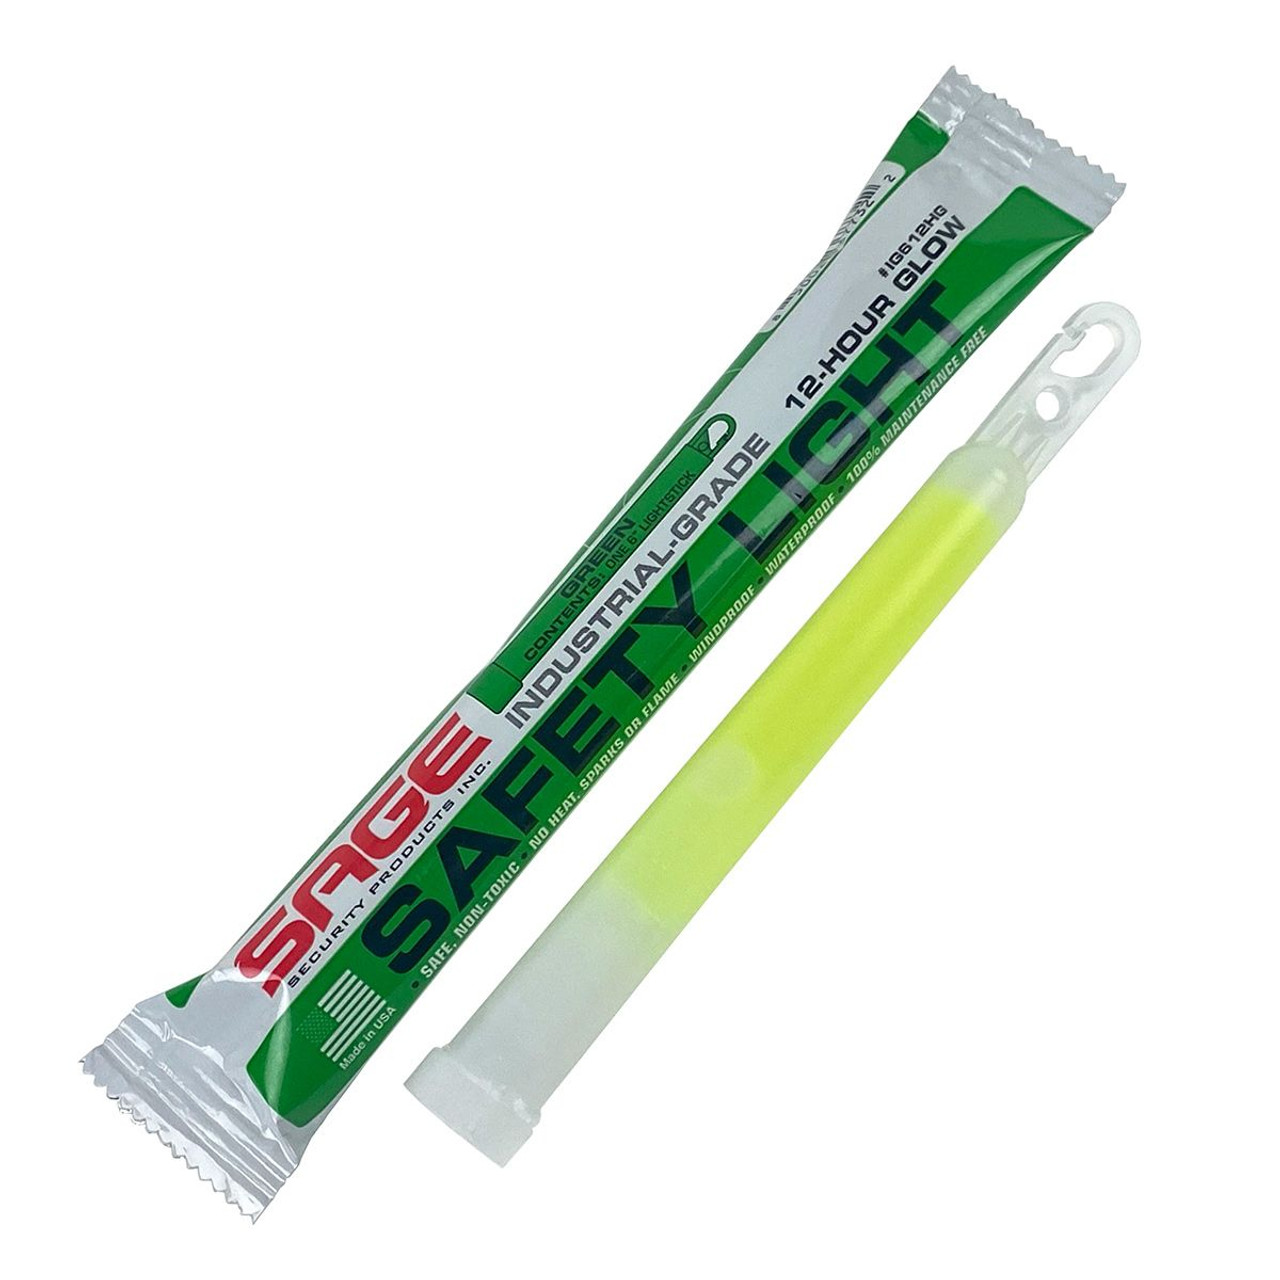 12-Pack - Sage 12-Hour Green Glow Safety Light Stick - 6